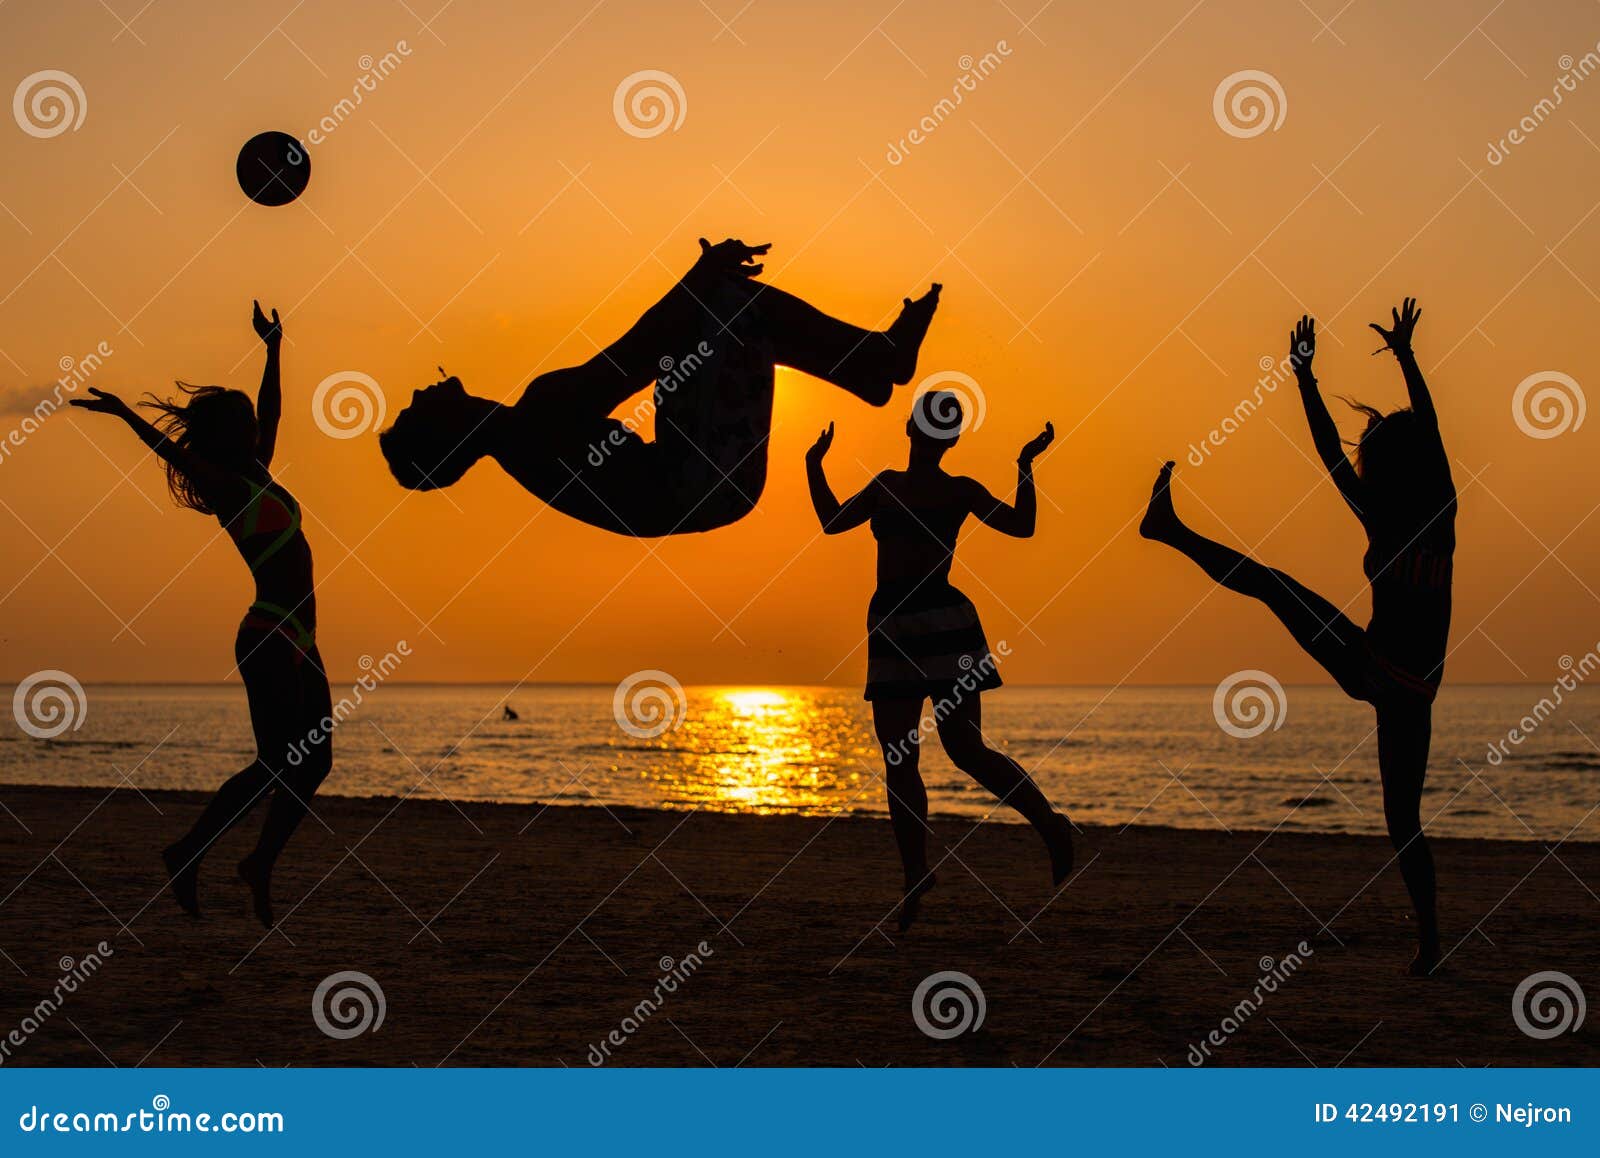 silhouettes of a people having fun on a beach